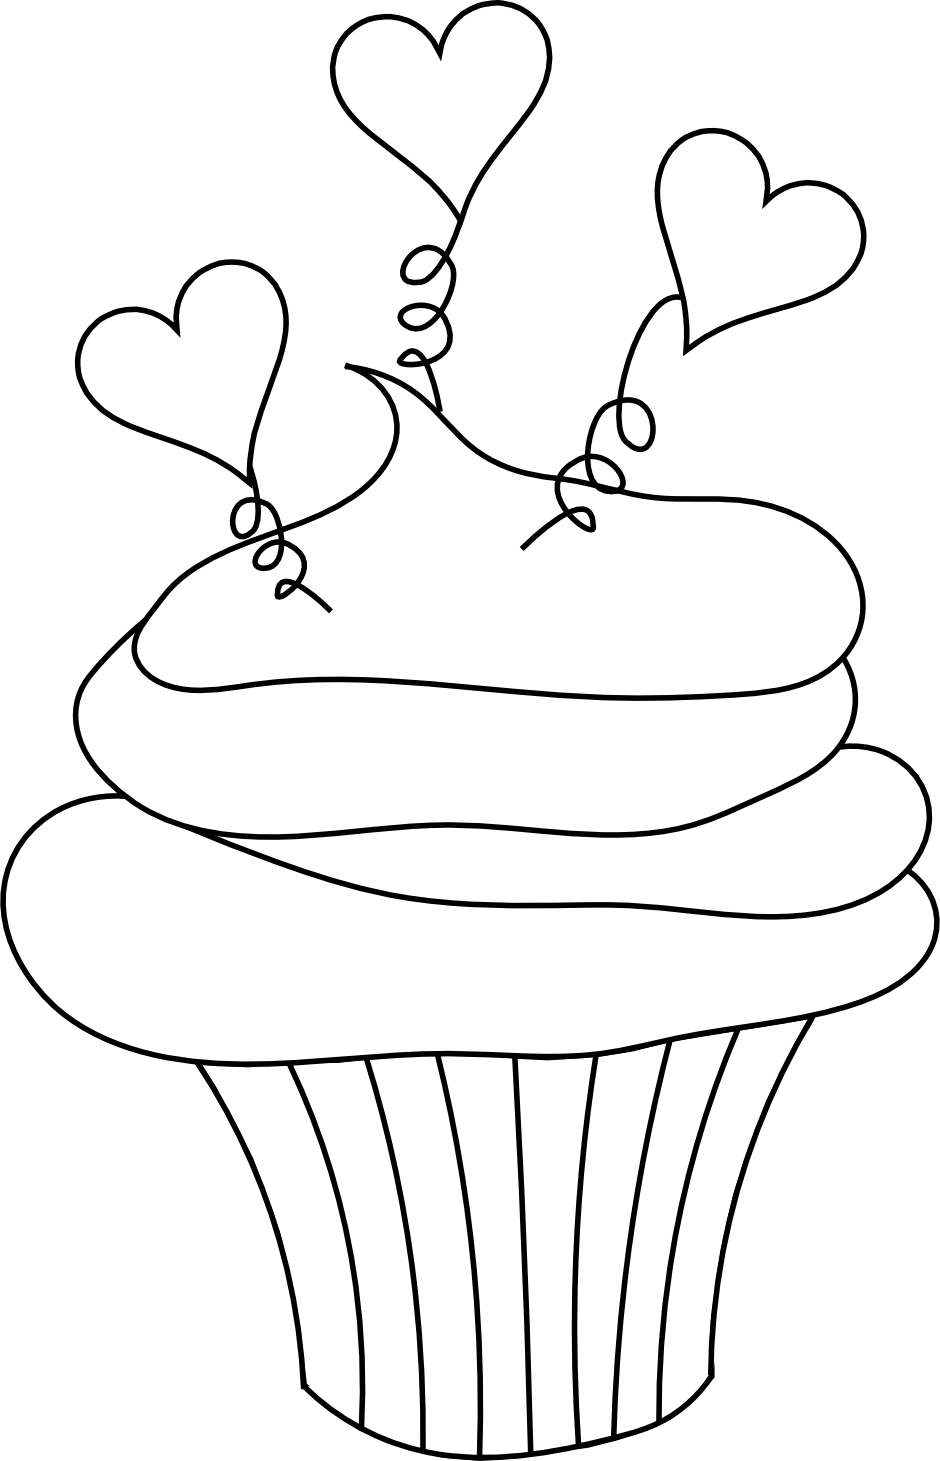 Free Valentine's Day Digital Stamp - Cupcake with Hearts Free ...